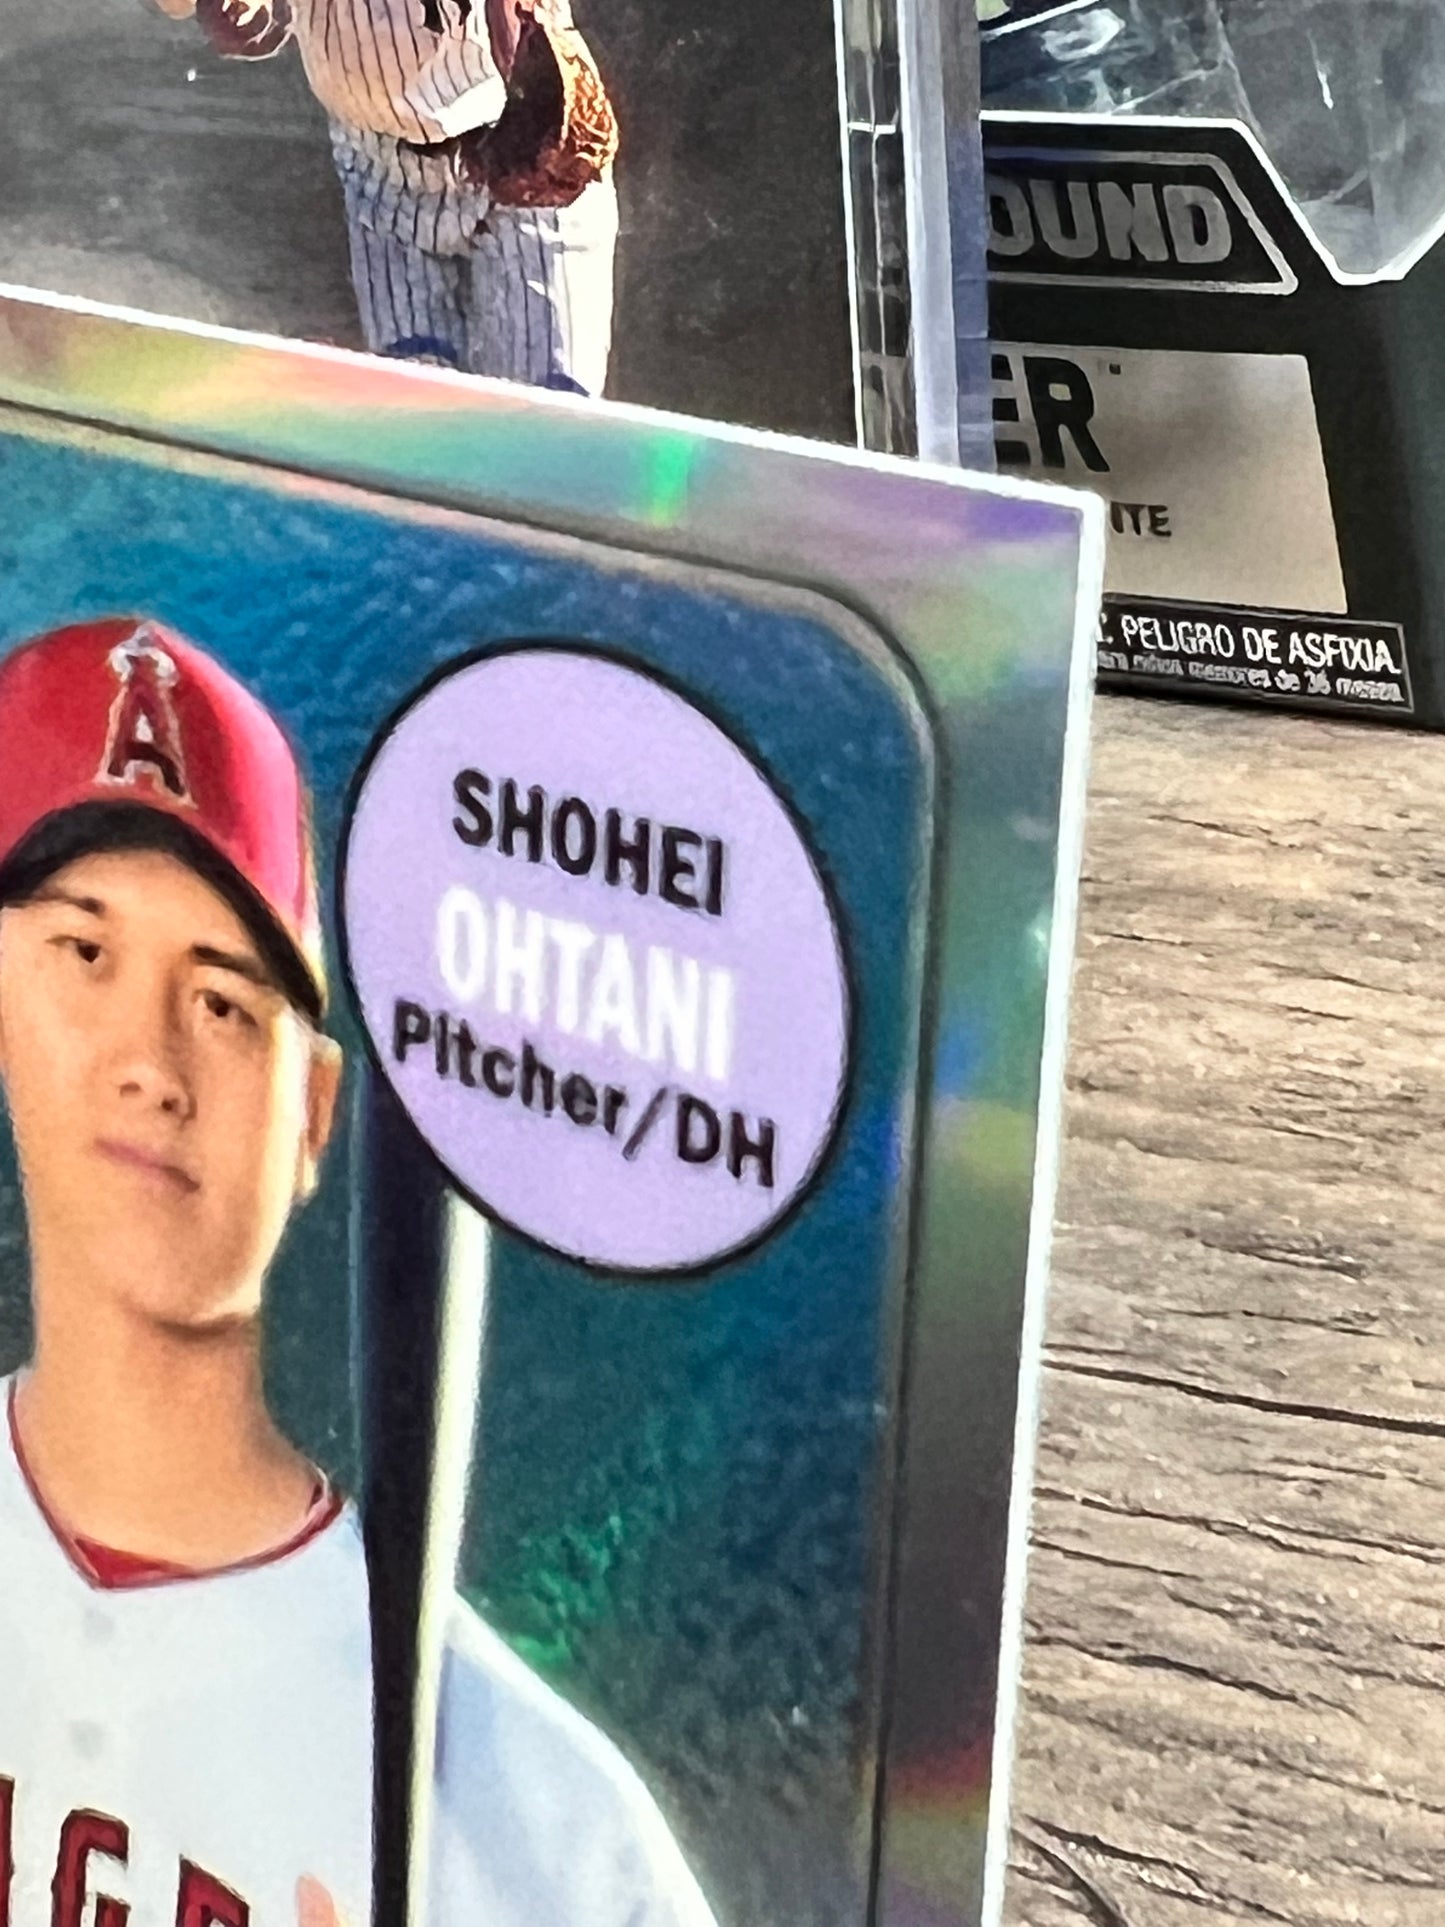 2018 Topps Heritage Shohei Ohtani RC Chrome Refractor #/569 Angels Rookie